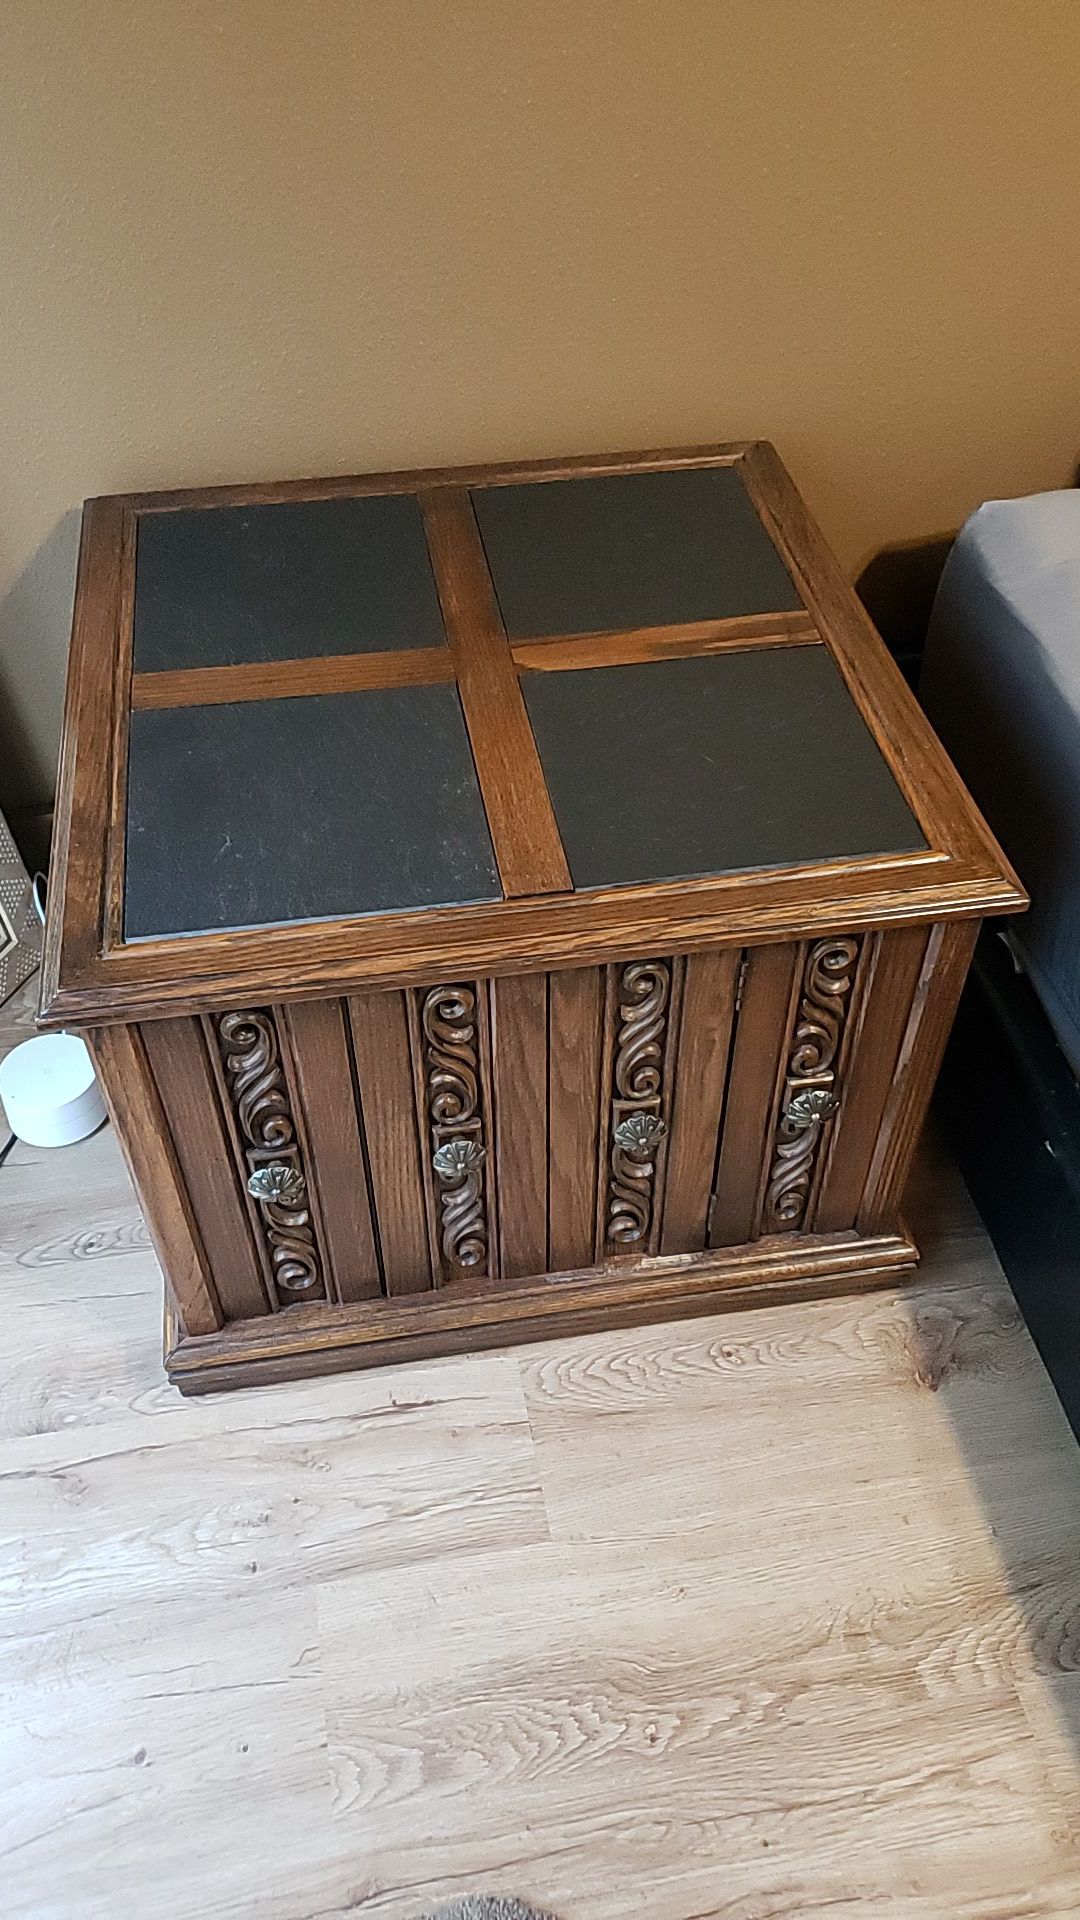 End table/bedside table